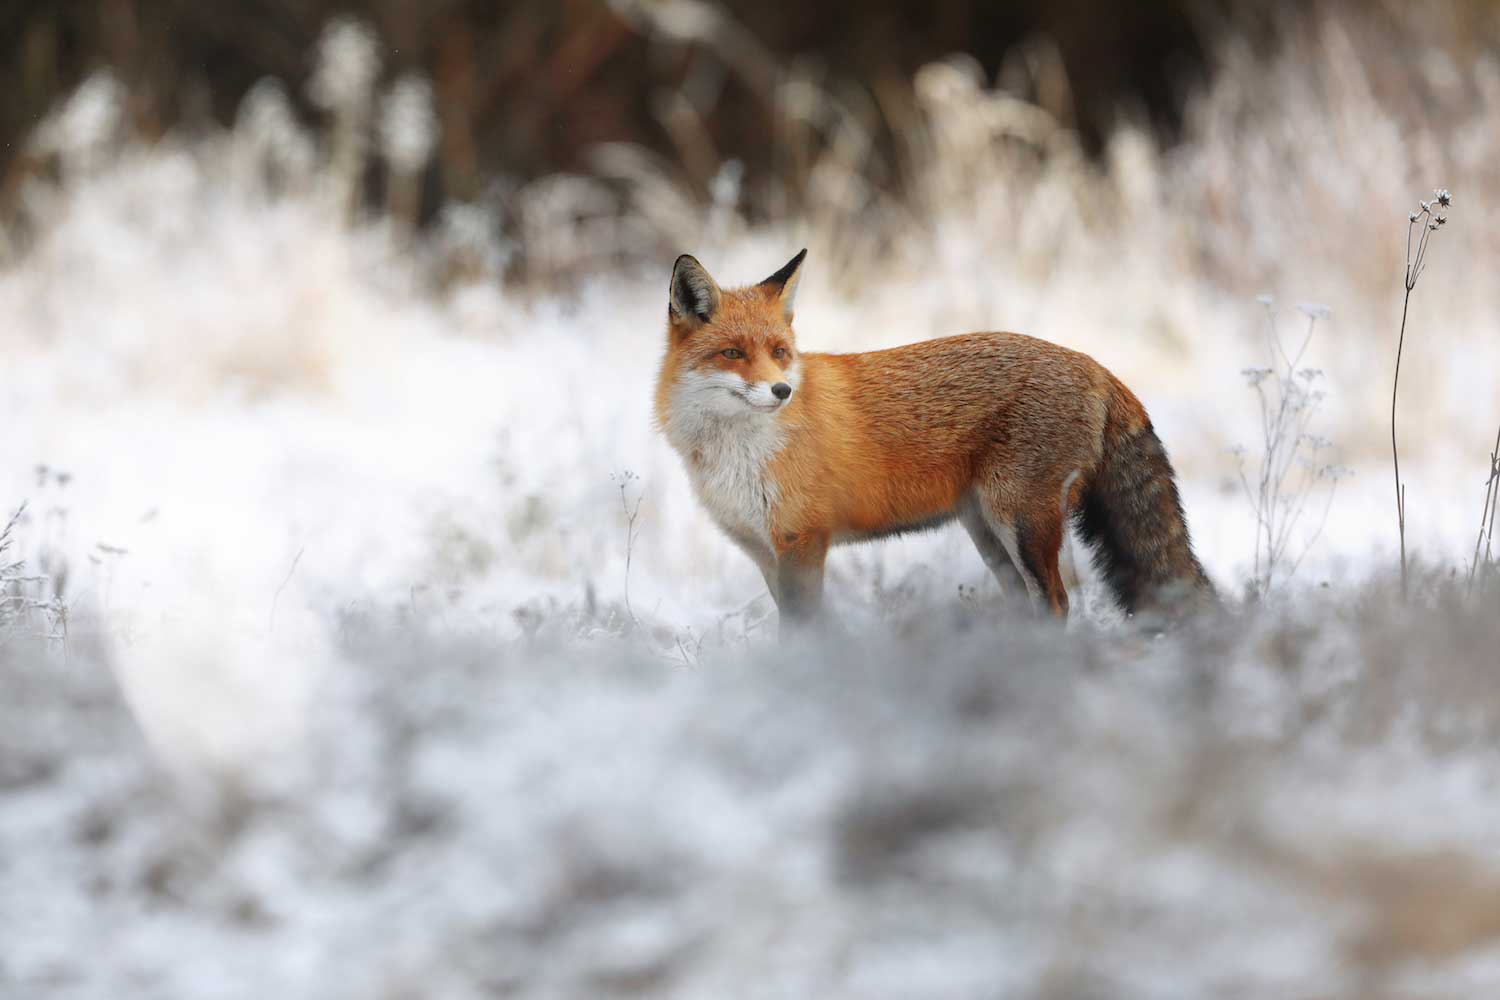 A red fox standing in a snowy winter landscape.